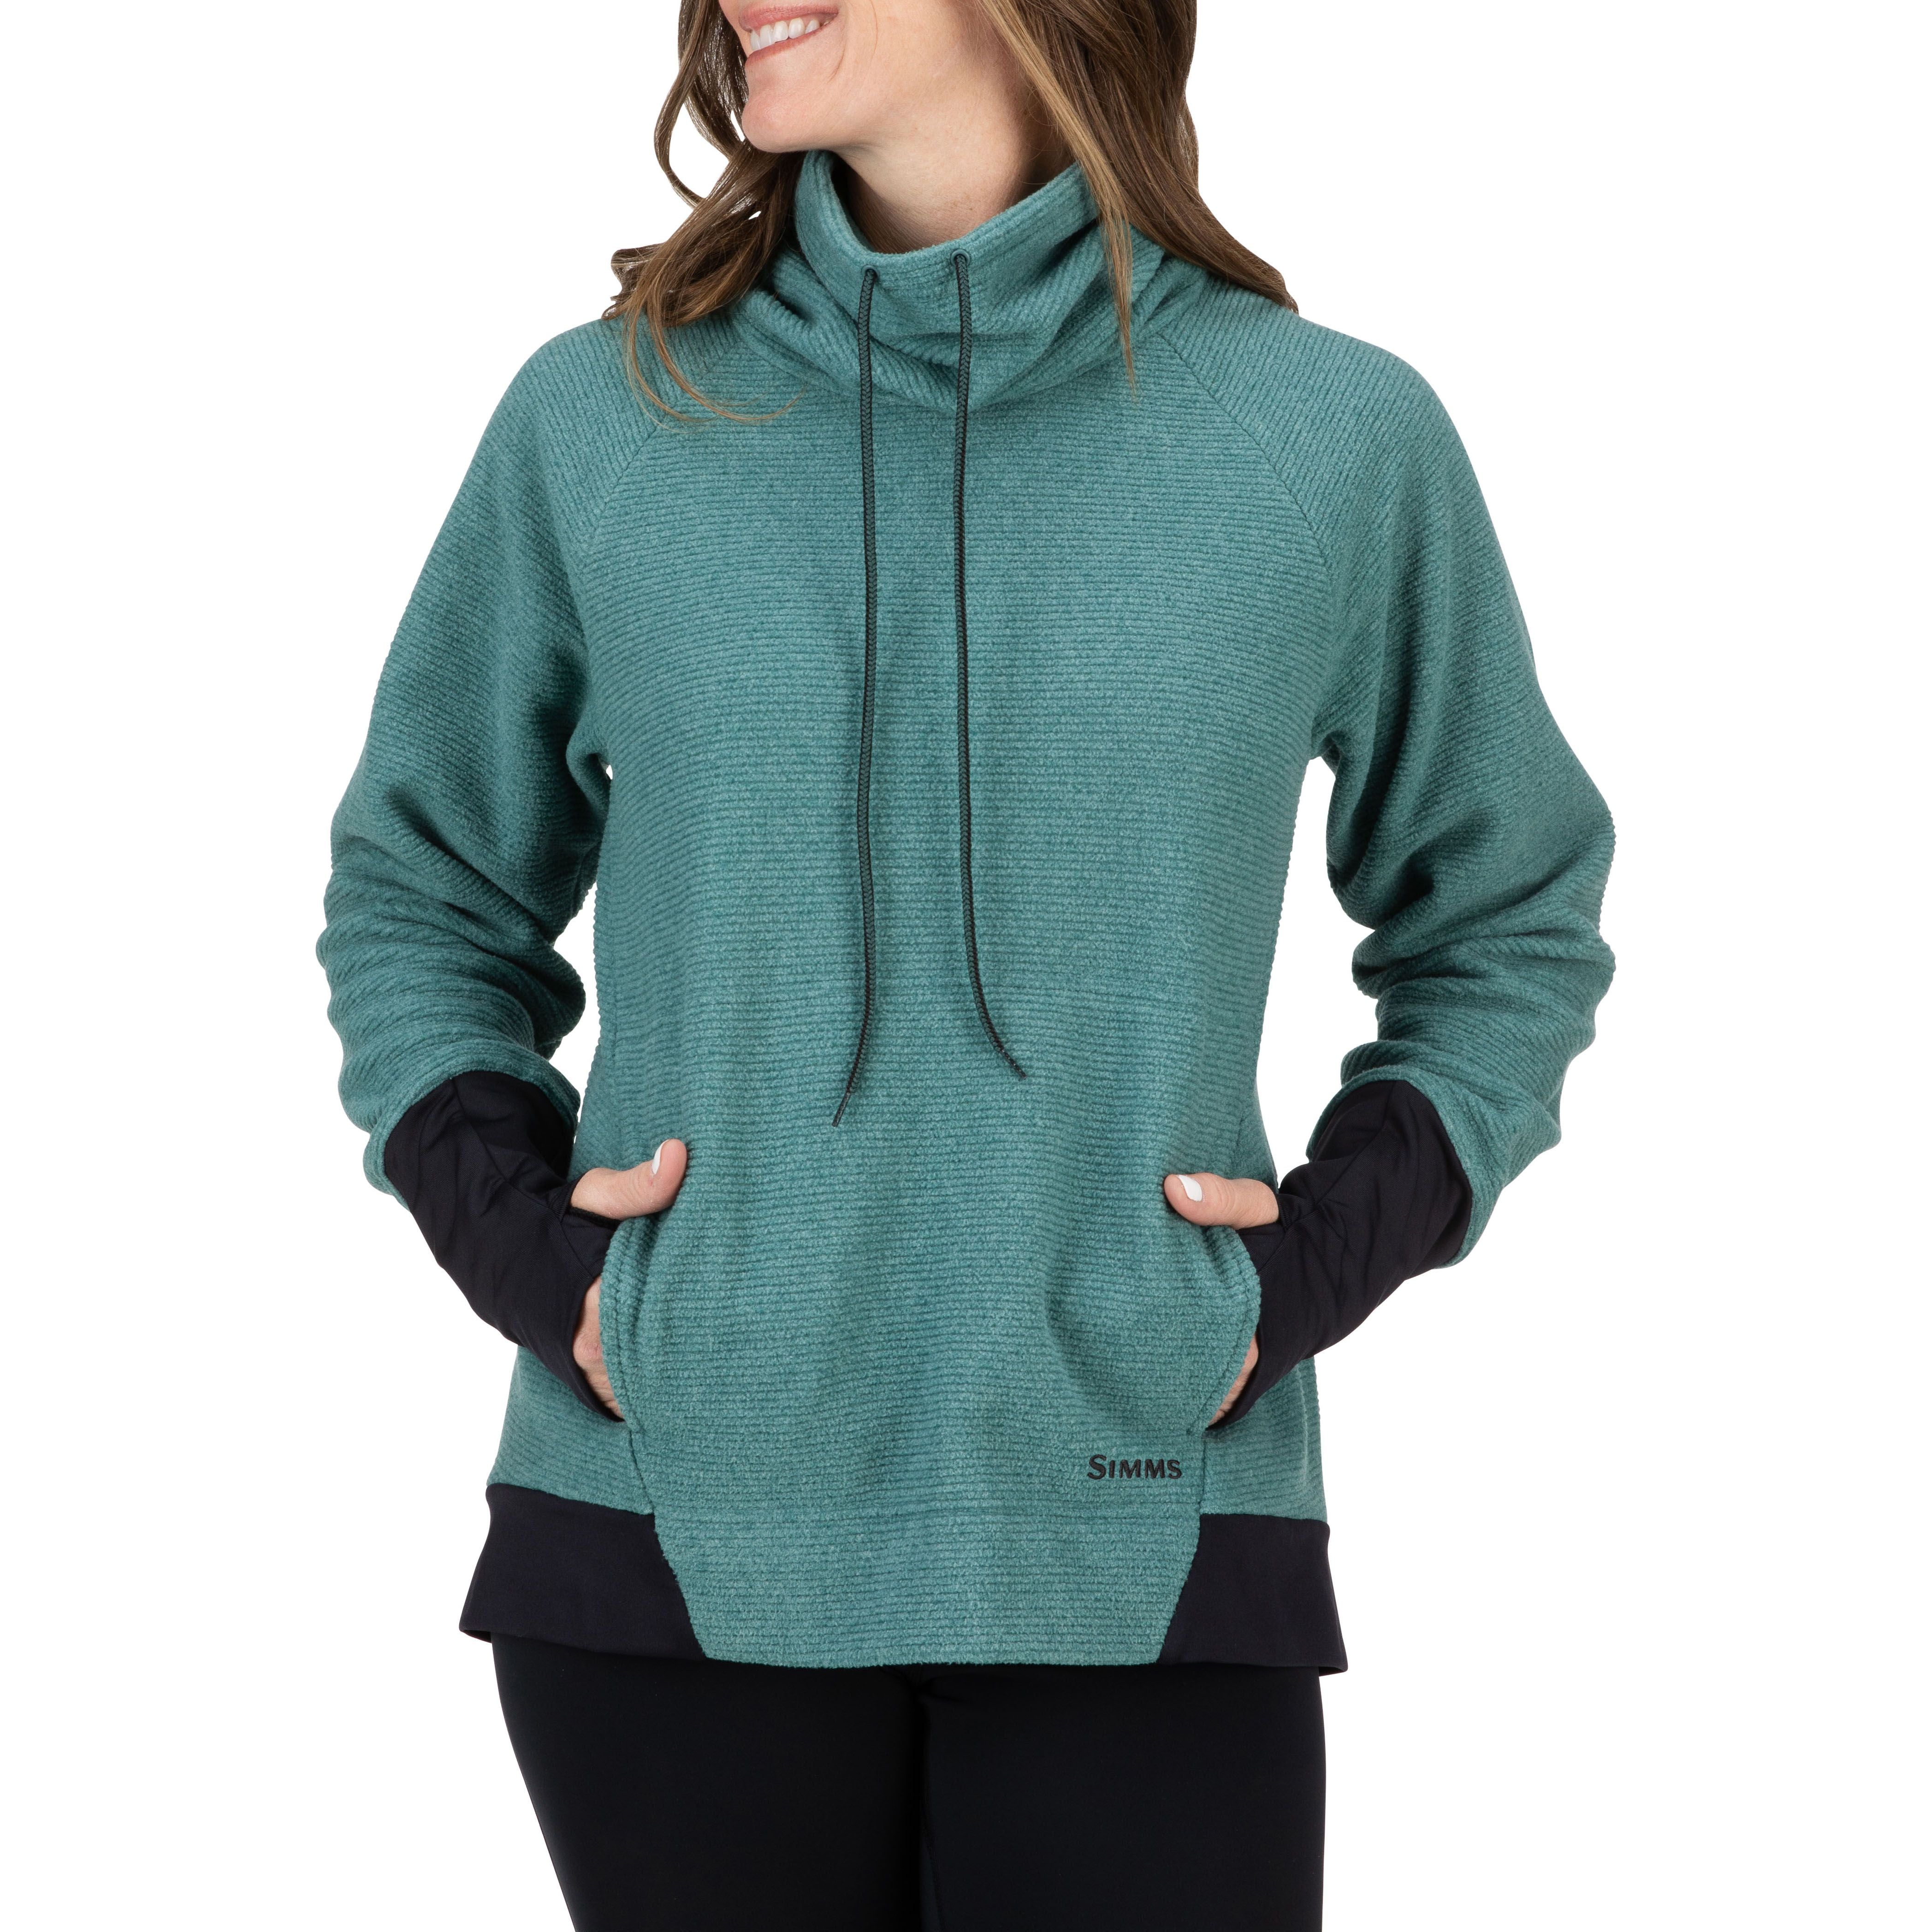 Simms Women's Rivershed Sweater Avalon Teal Image 03